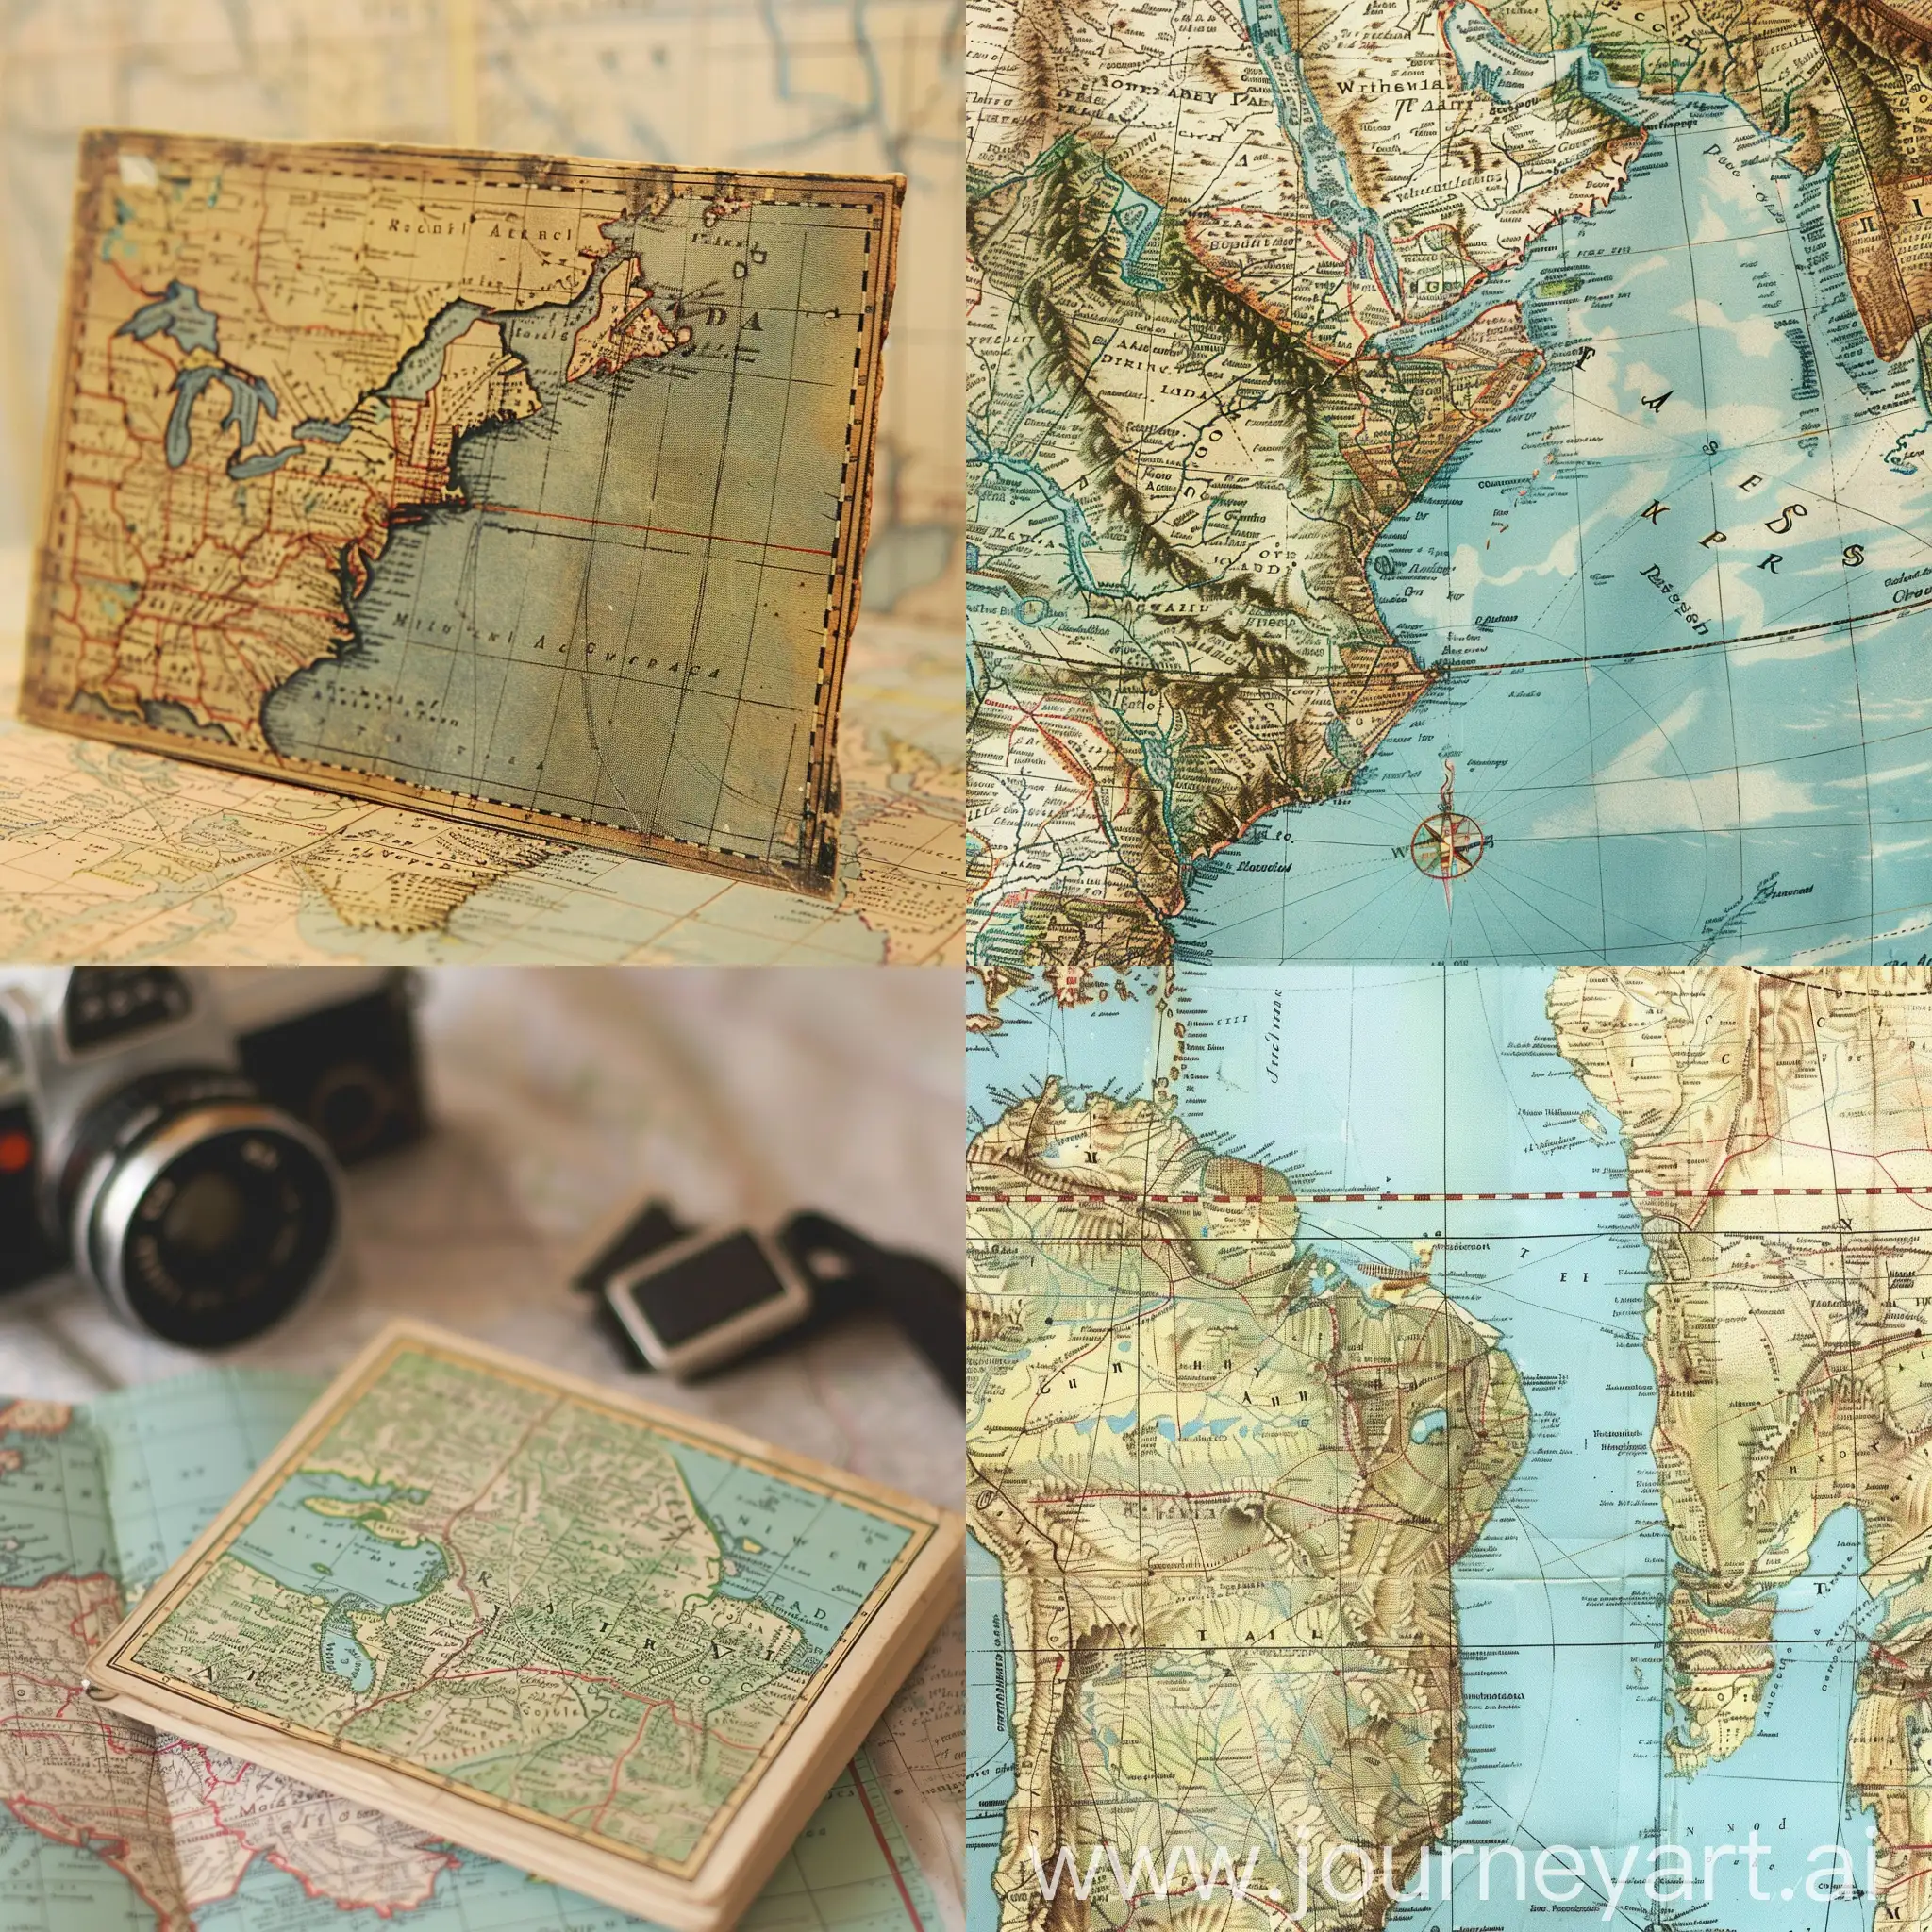  vintage maps or geographical coordinates of significant locations, like birthplaces or favorite travel destinations. This adds a touch of nostalgia and personal connection to the design.